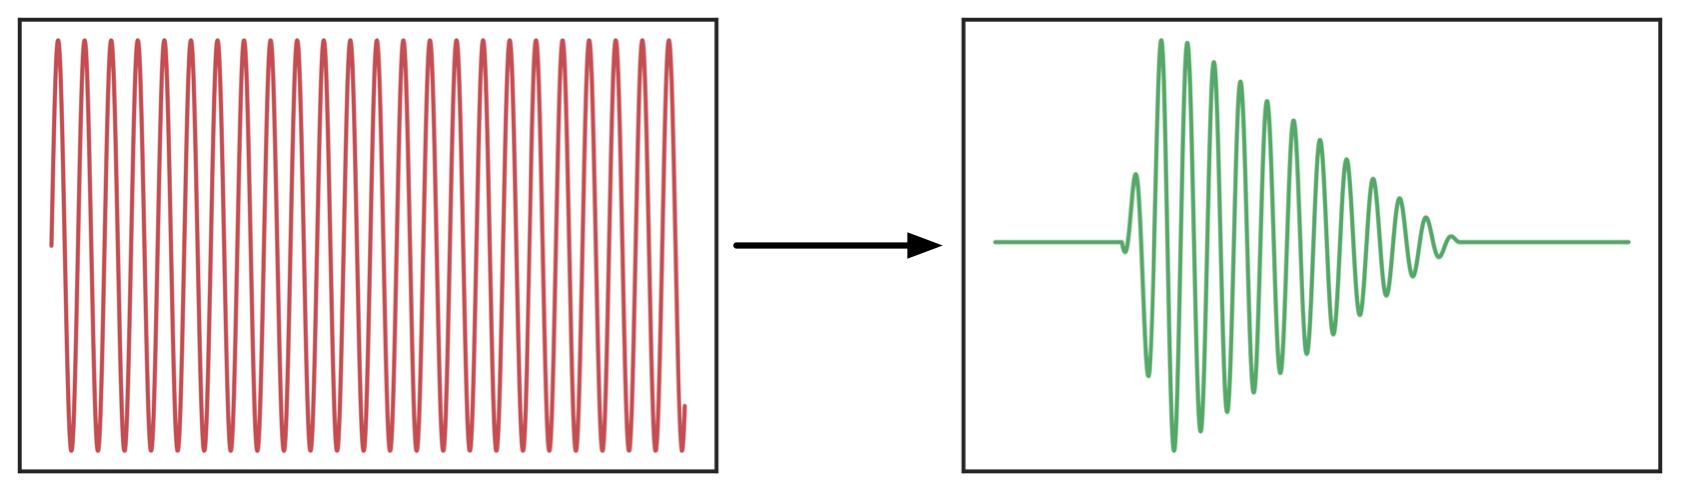 We can change the amplitude over the [envelope](https://cs.anu.edu.au/courses/comp2300/lectures/digital-synthesis/#/amplitude-envelope) to give a note a sonic “shape”.